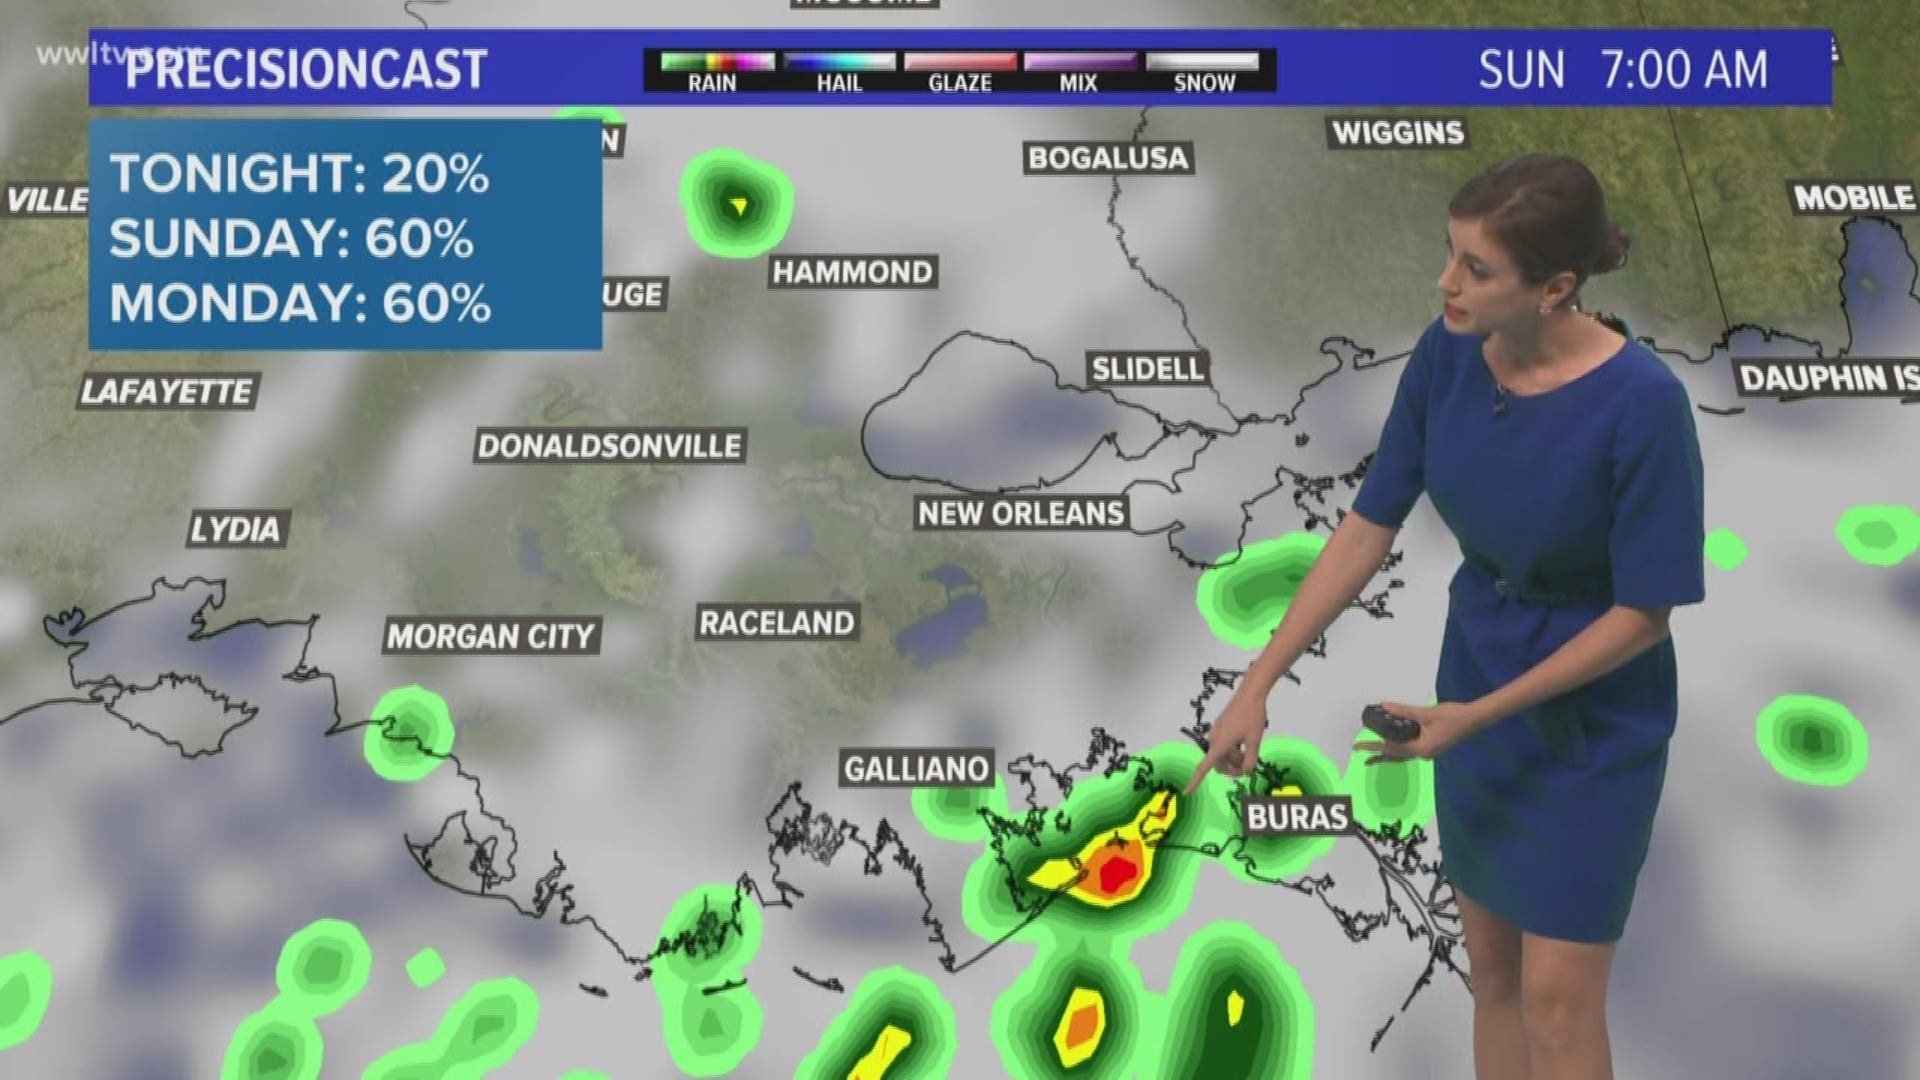 Meteorologist Alexandra Cranford has the forecast at 10 p.m. on Saturday, August 17, 2019.